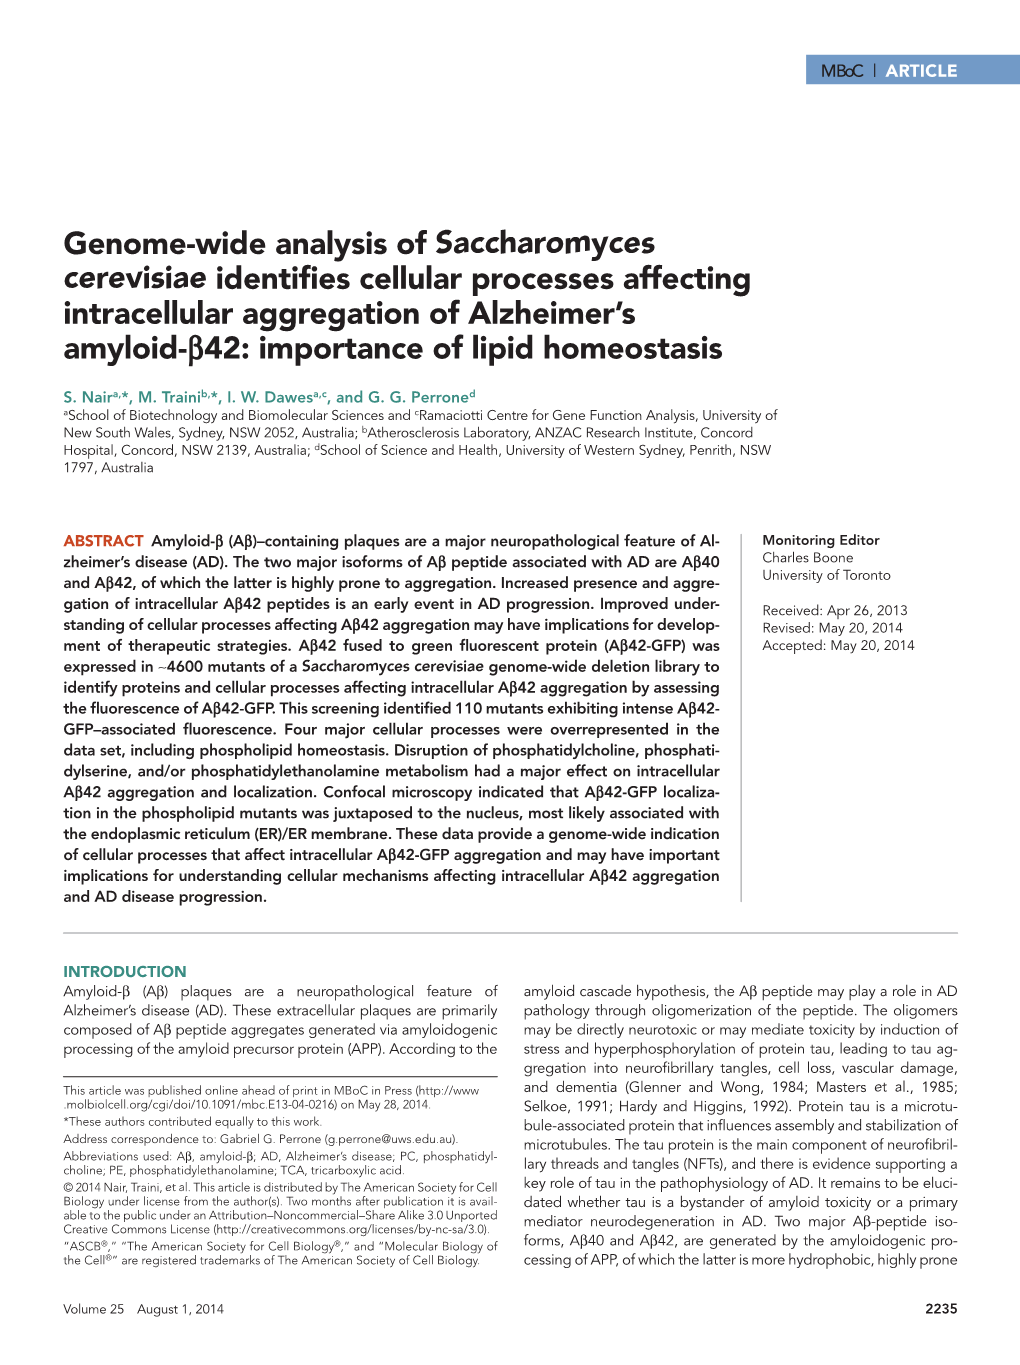 Genome-Wide Analysis of Saccharomyces Cerevisiae